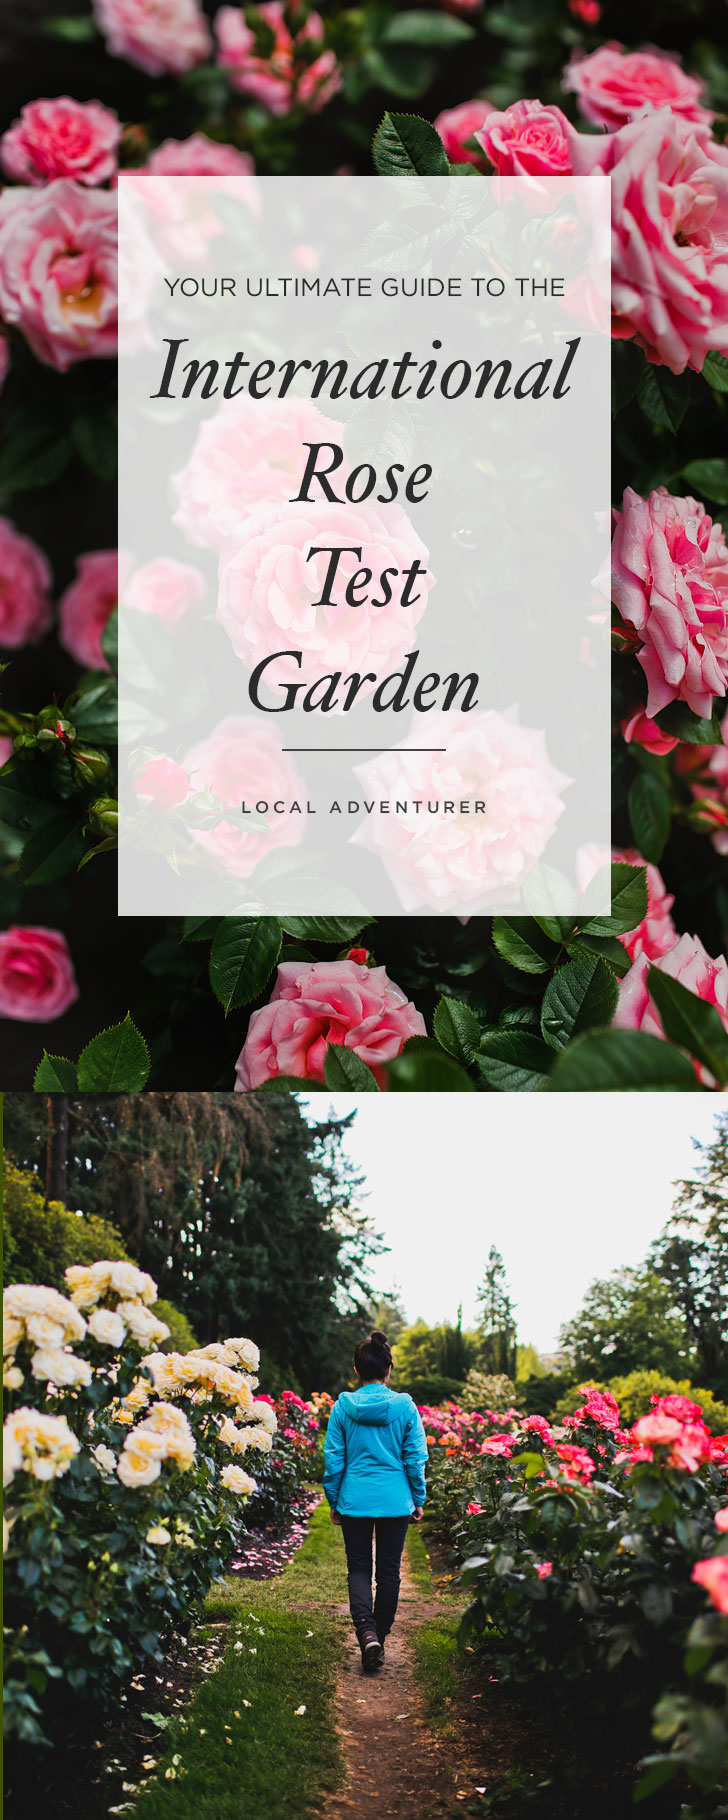 Visiting Portland Oregon? You’ll want to visit this Portland rose garden. There are 8,000 rose plants and roughly 550 different varieties. Click through to see more photos and tips // Local Adventurer #pnw #rose #portland